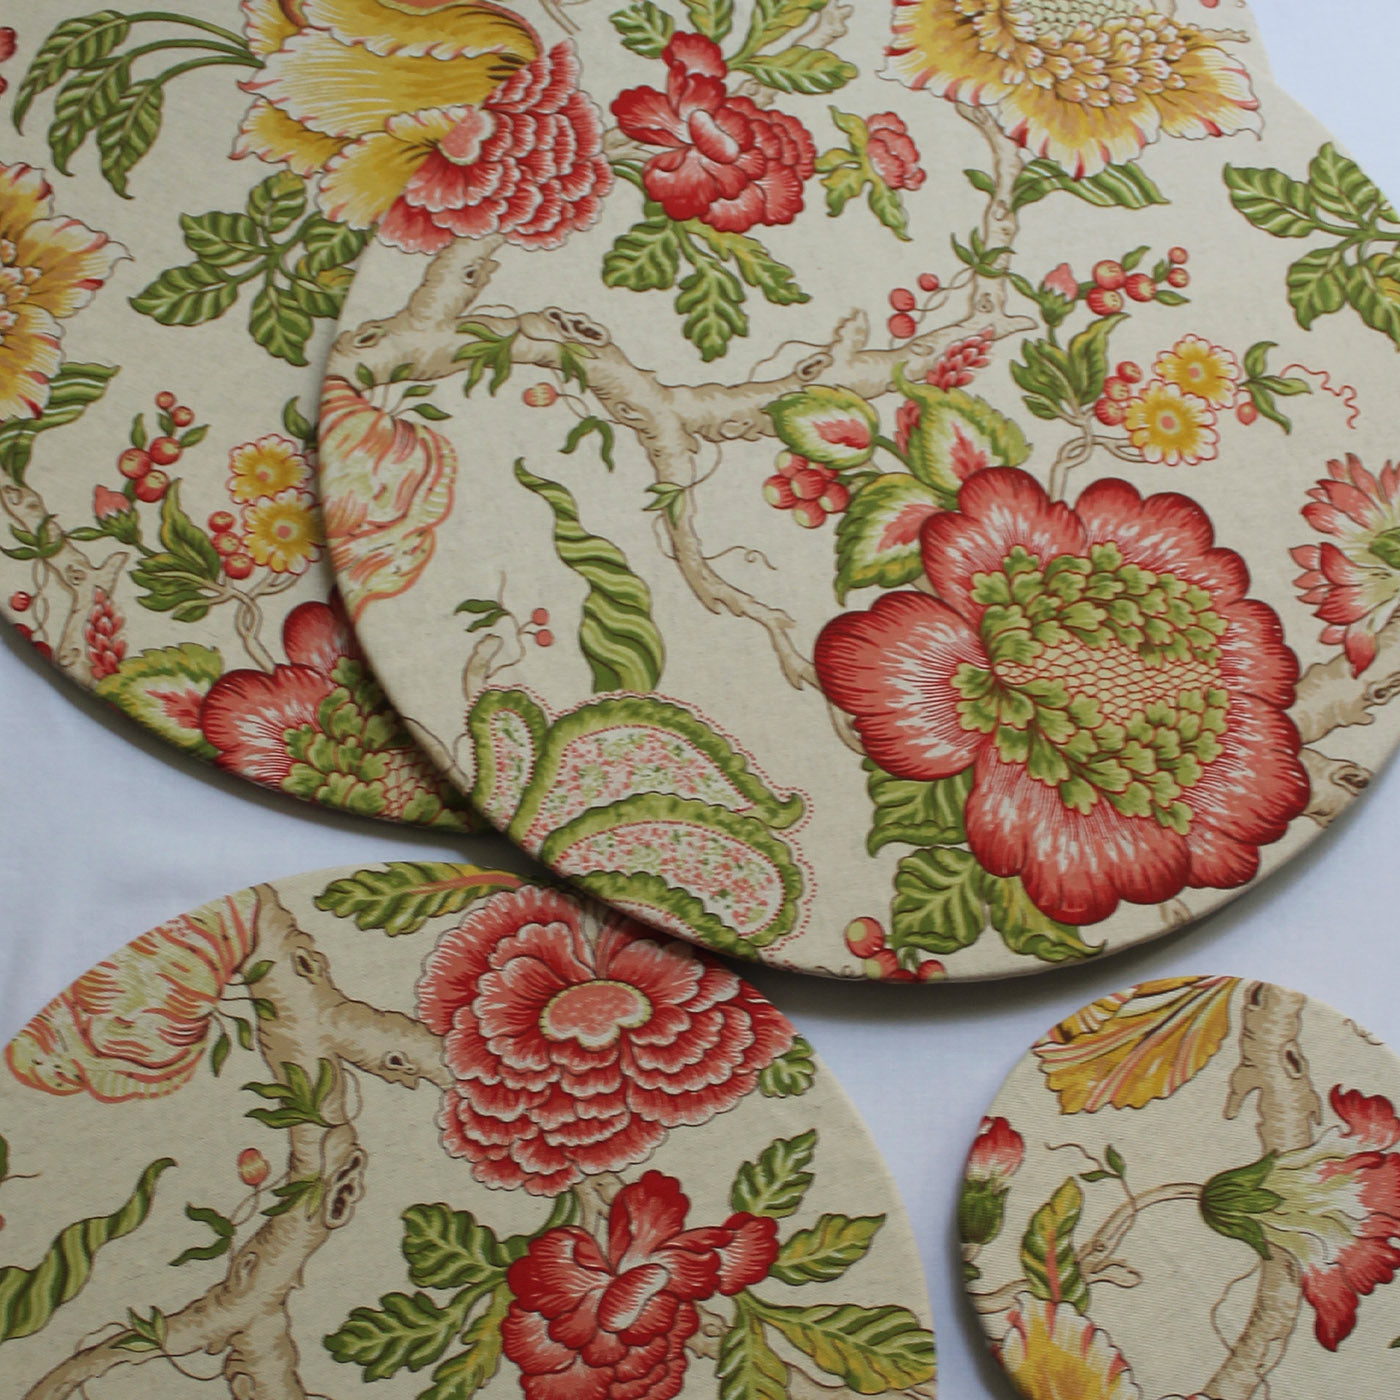 Set of 2 Cuffiette Extra-Small Round Floral Placemats #1 - Alternative view 1